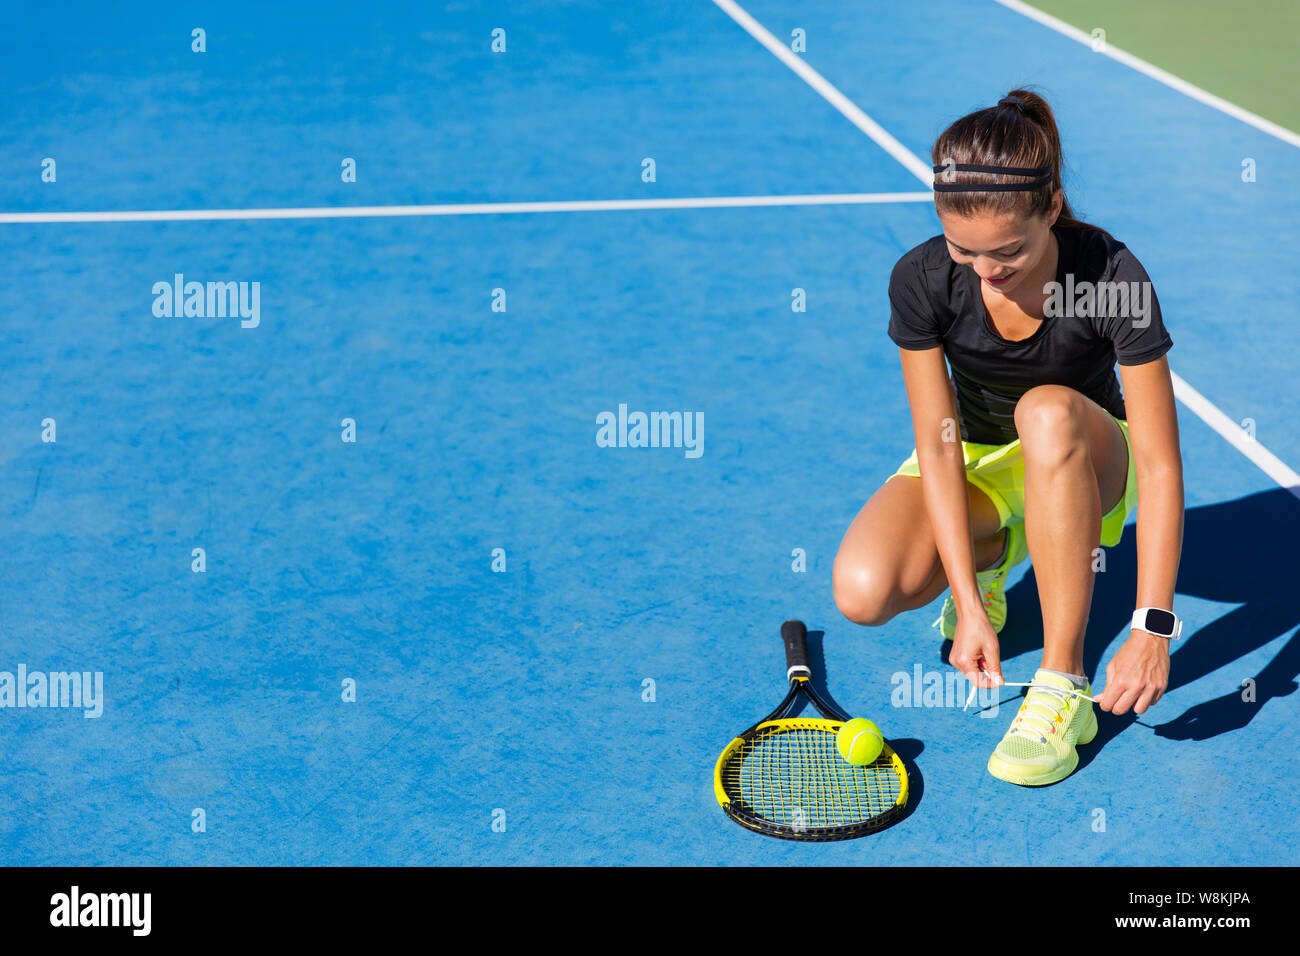 Sports woman Asian happy athlete getting ready for playing tennis tying laces of her running shoes on outdoor blue hard court. Professional player preparing for summer tournament game. Stock Photo